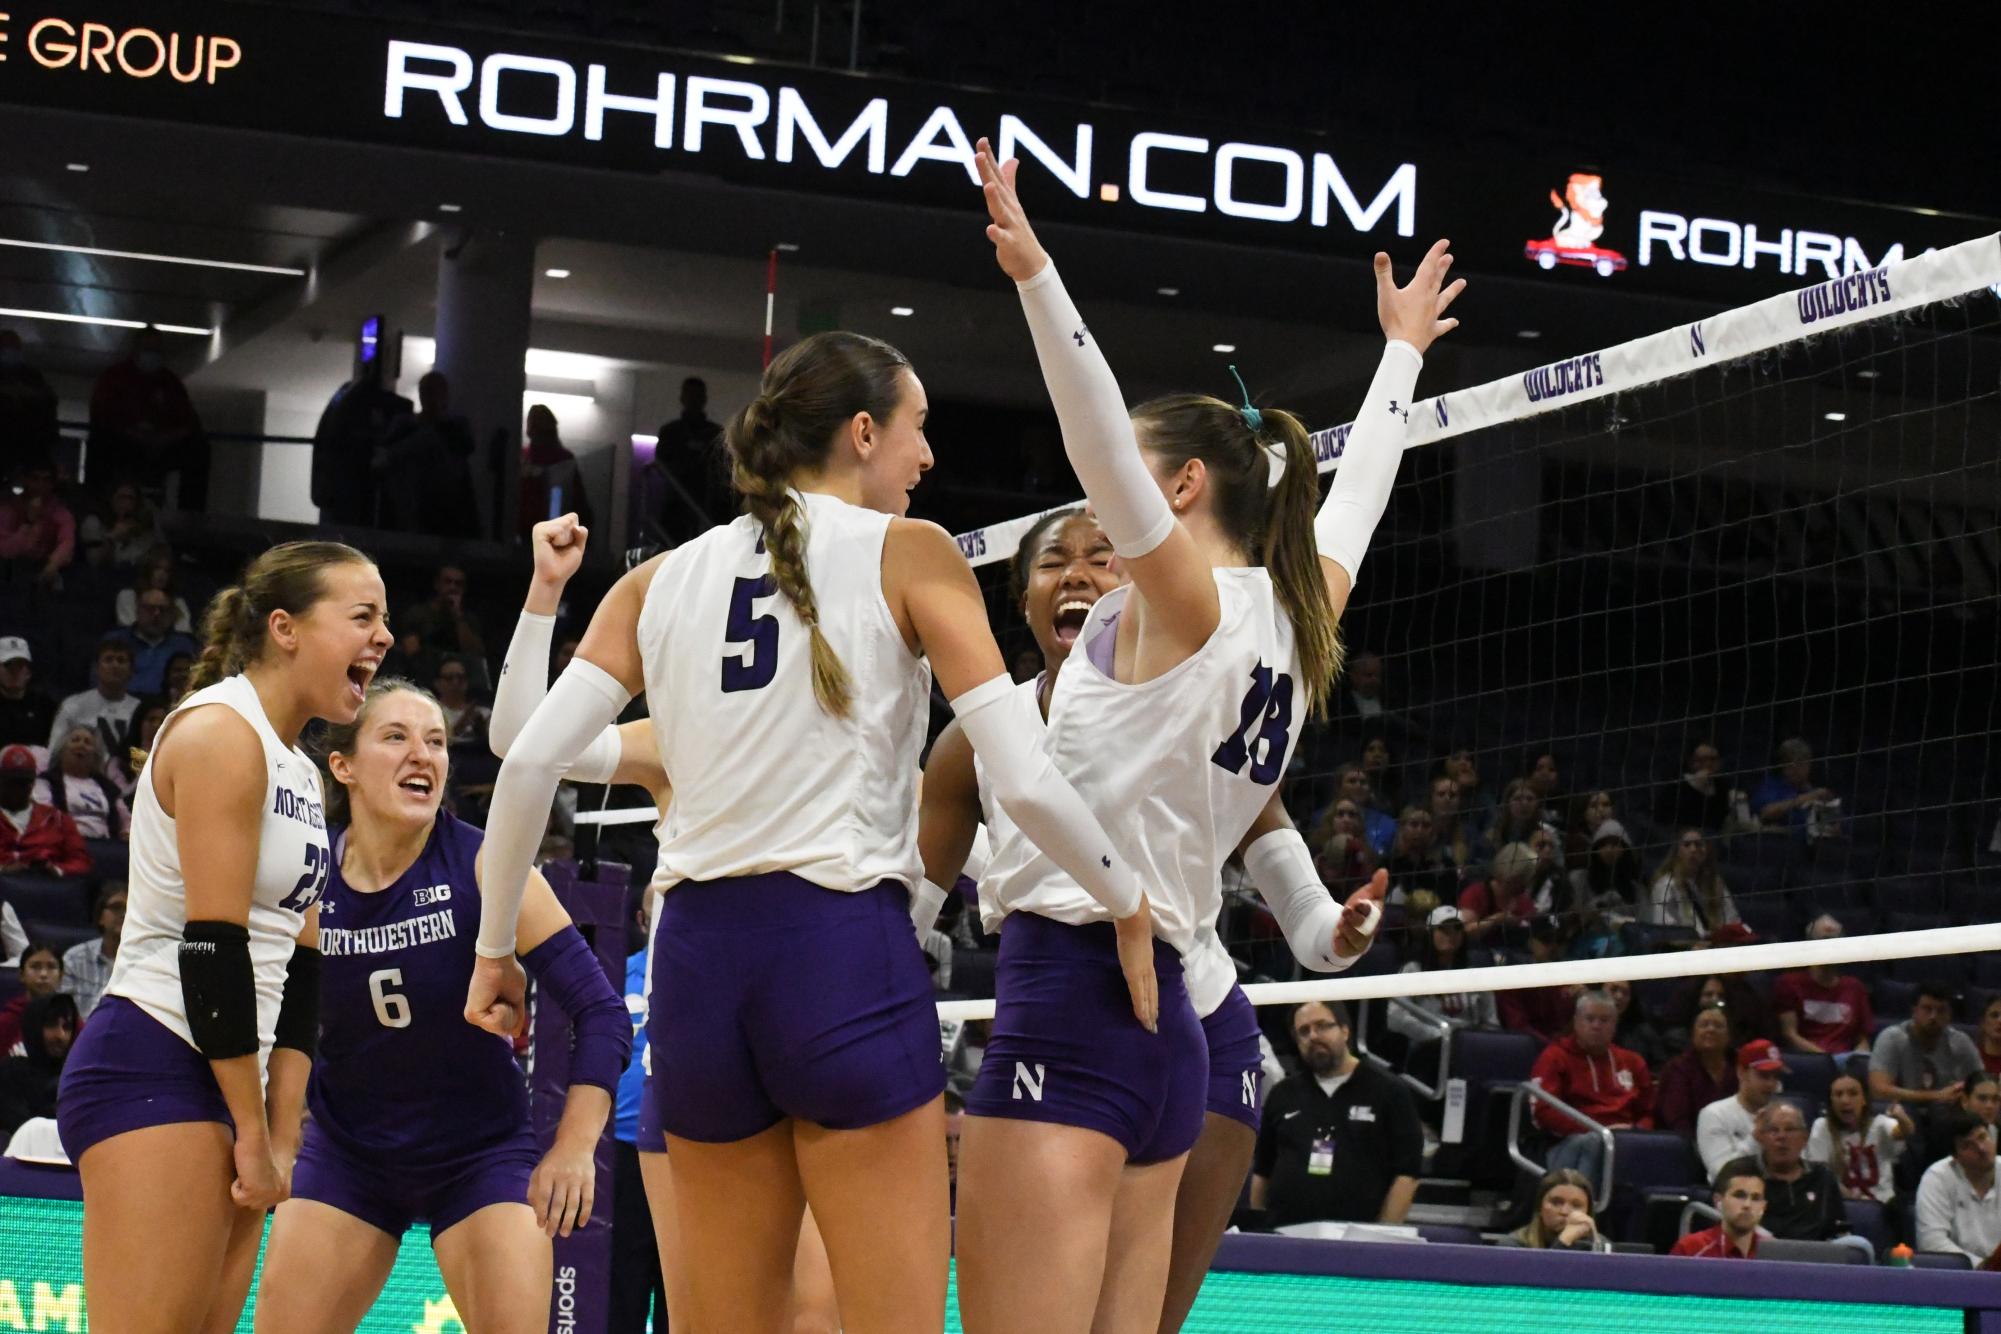 A group of players in white and purple volleyball uniforms celebrate.